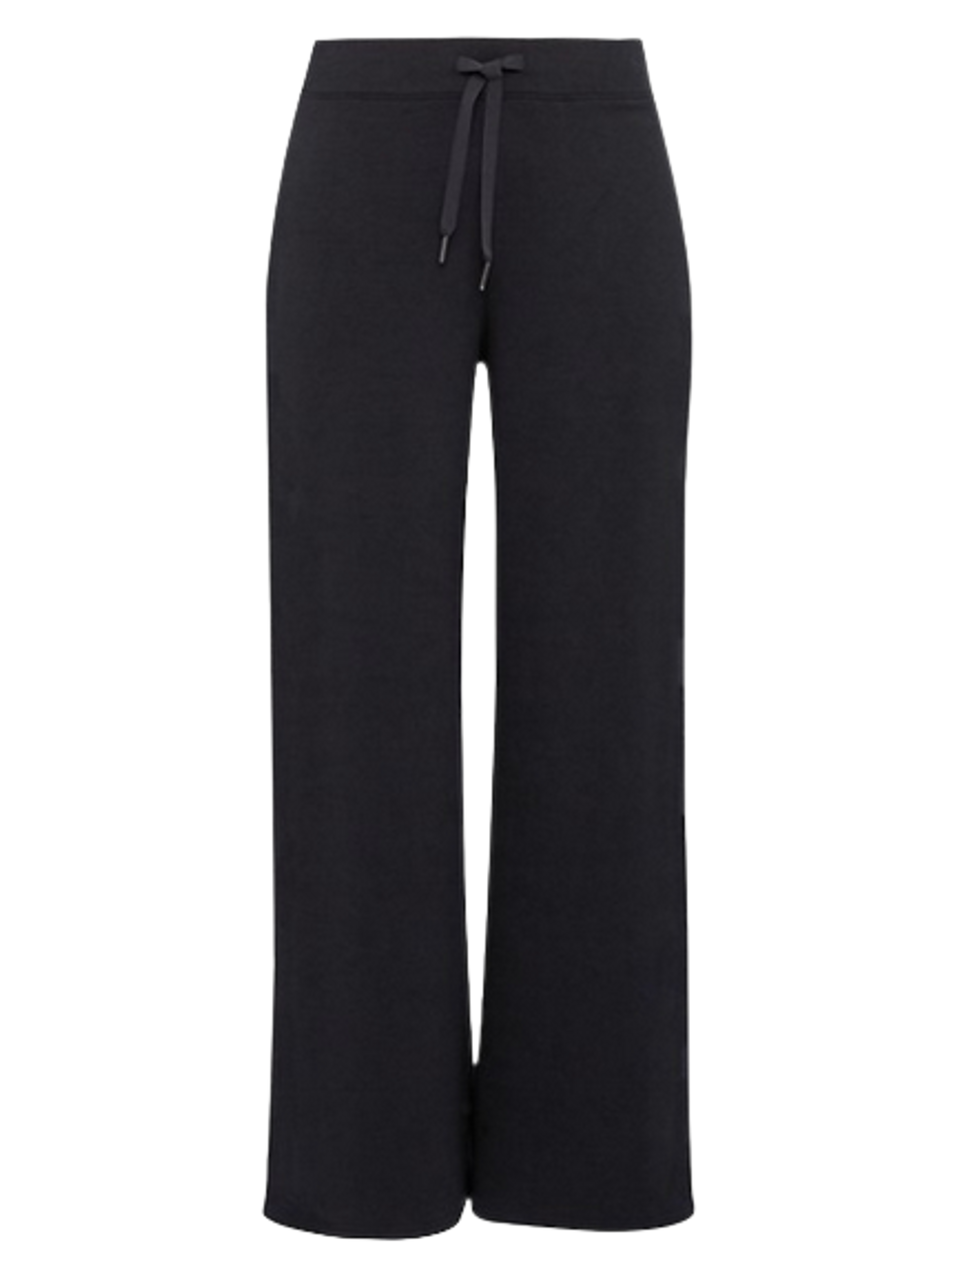 Airessentials Wide Leg Pant in Very Black *XS-XL*, Women's Clothing